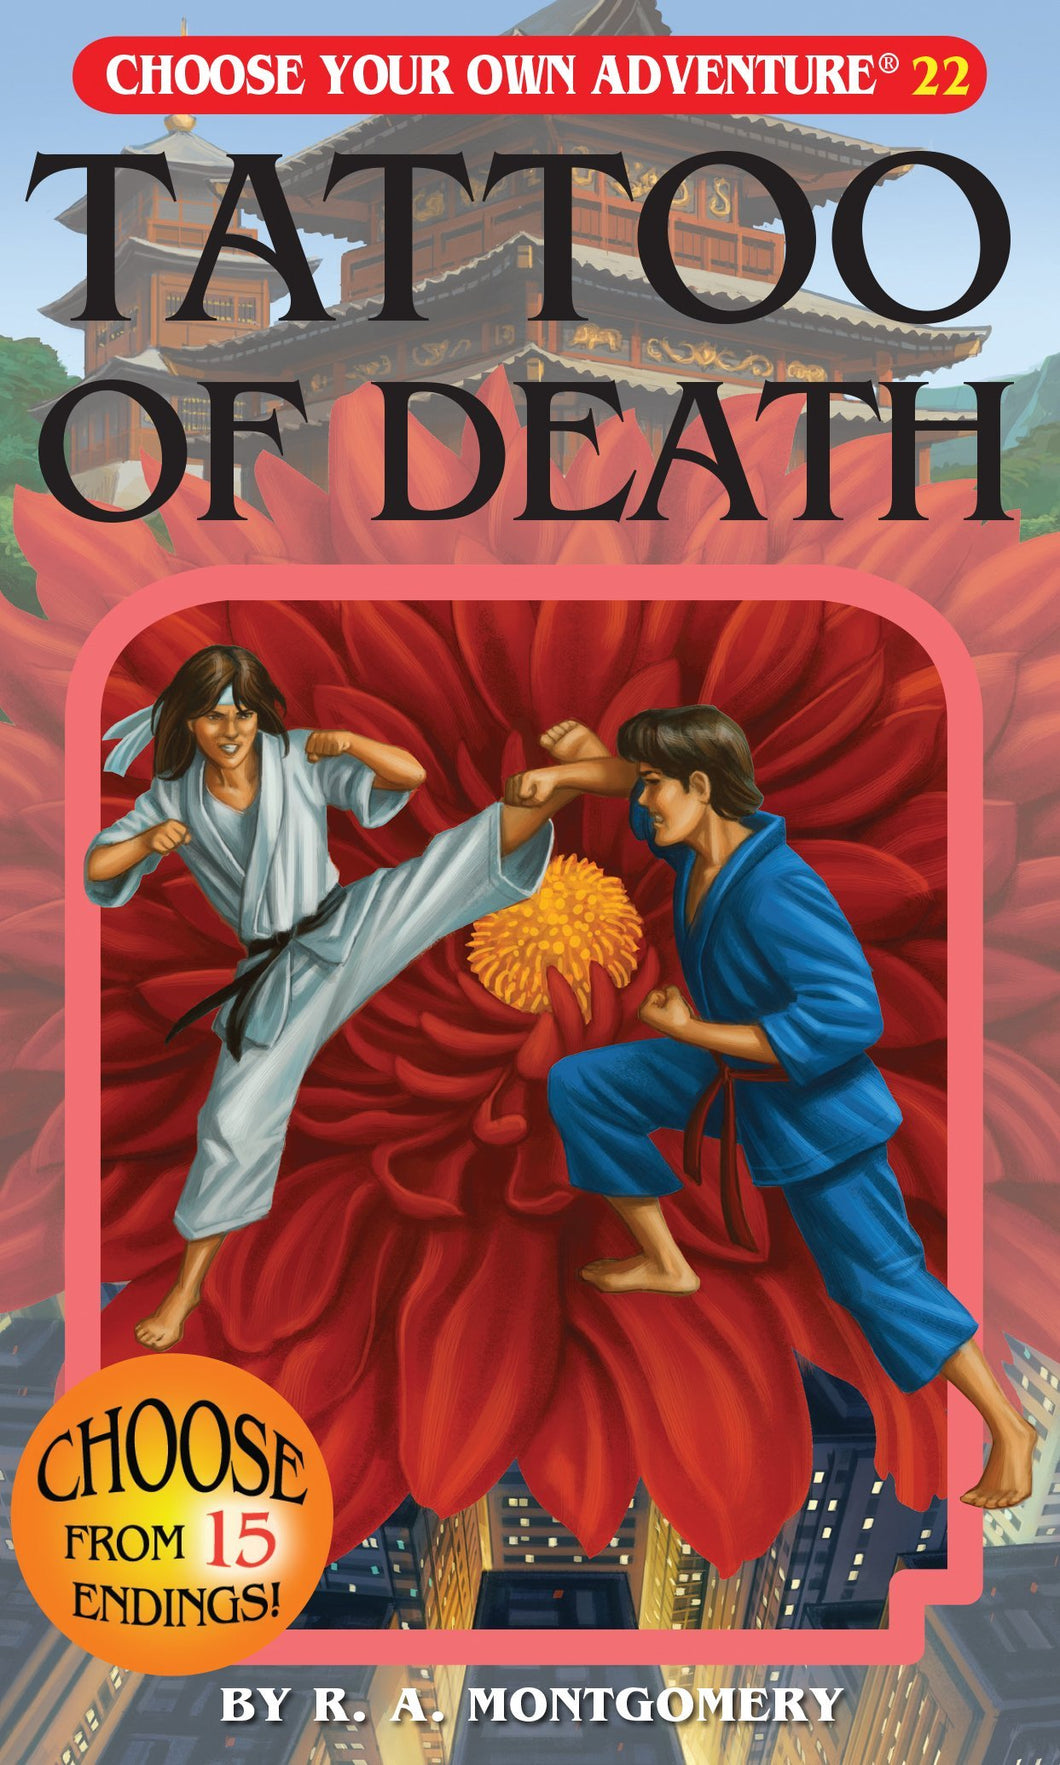 Choose Your Own Adventure Book-Tattoo of Death#22